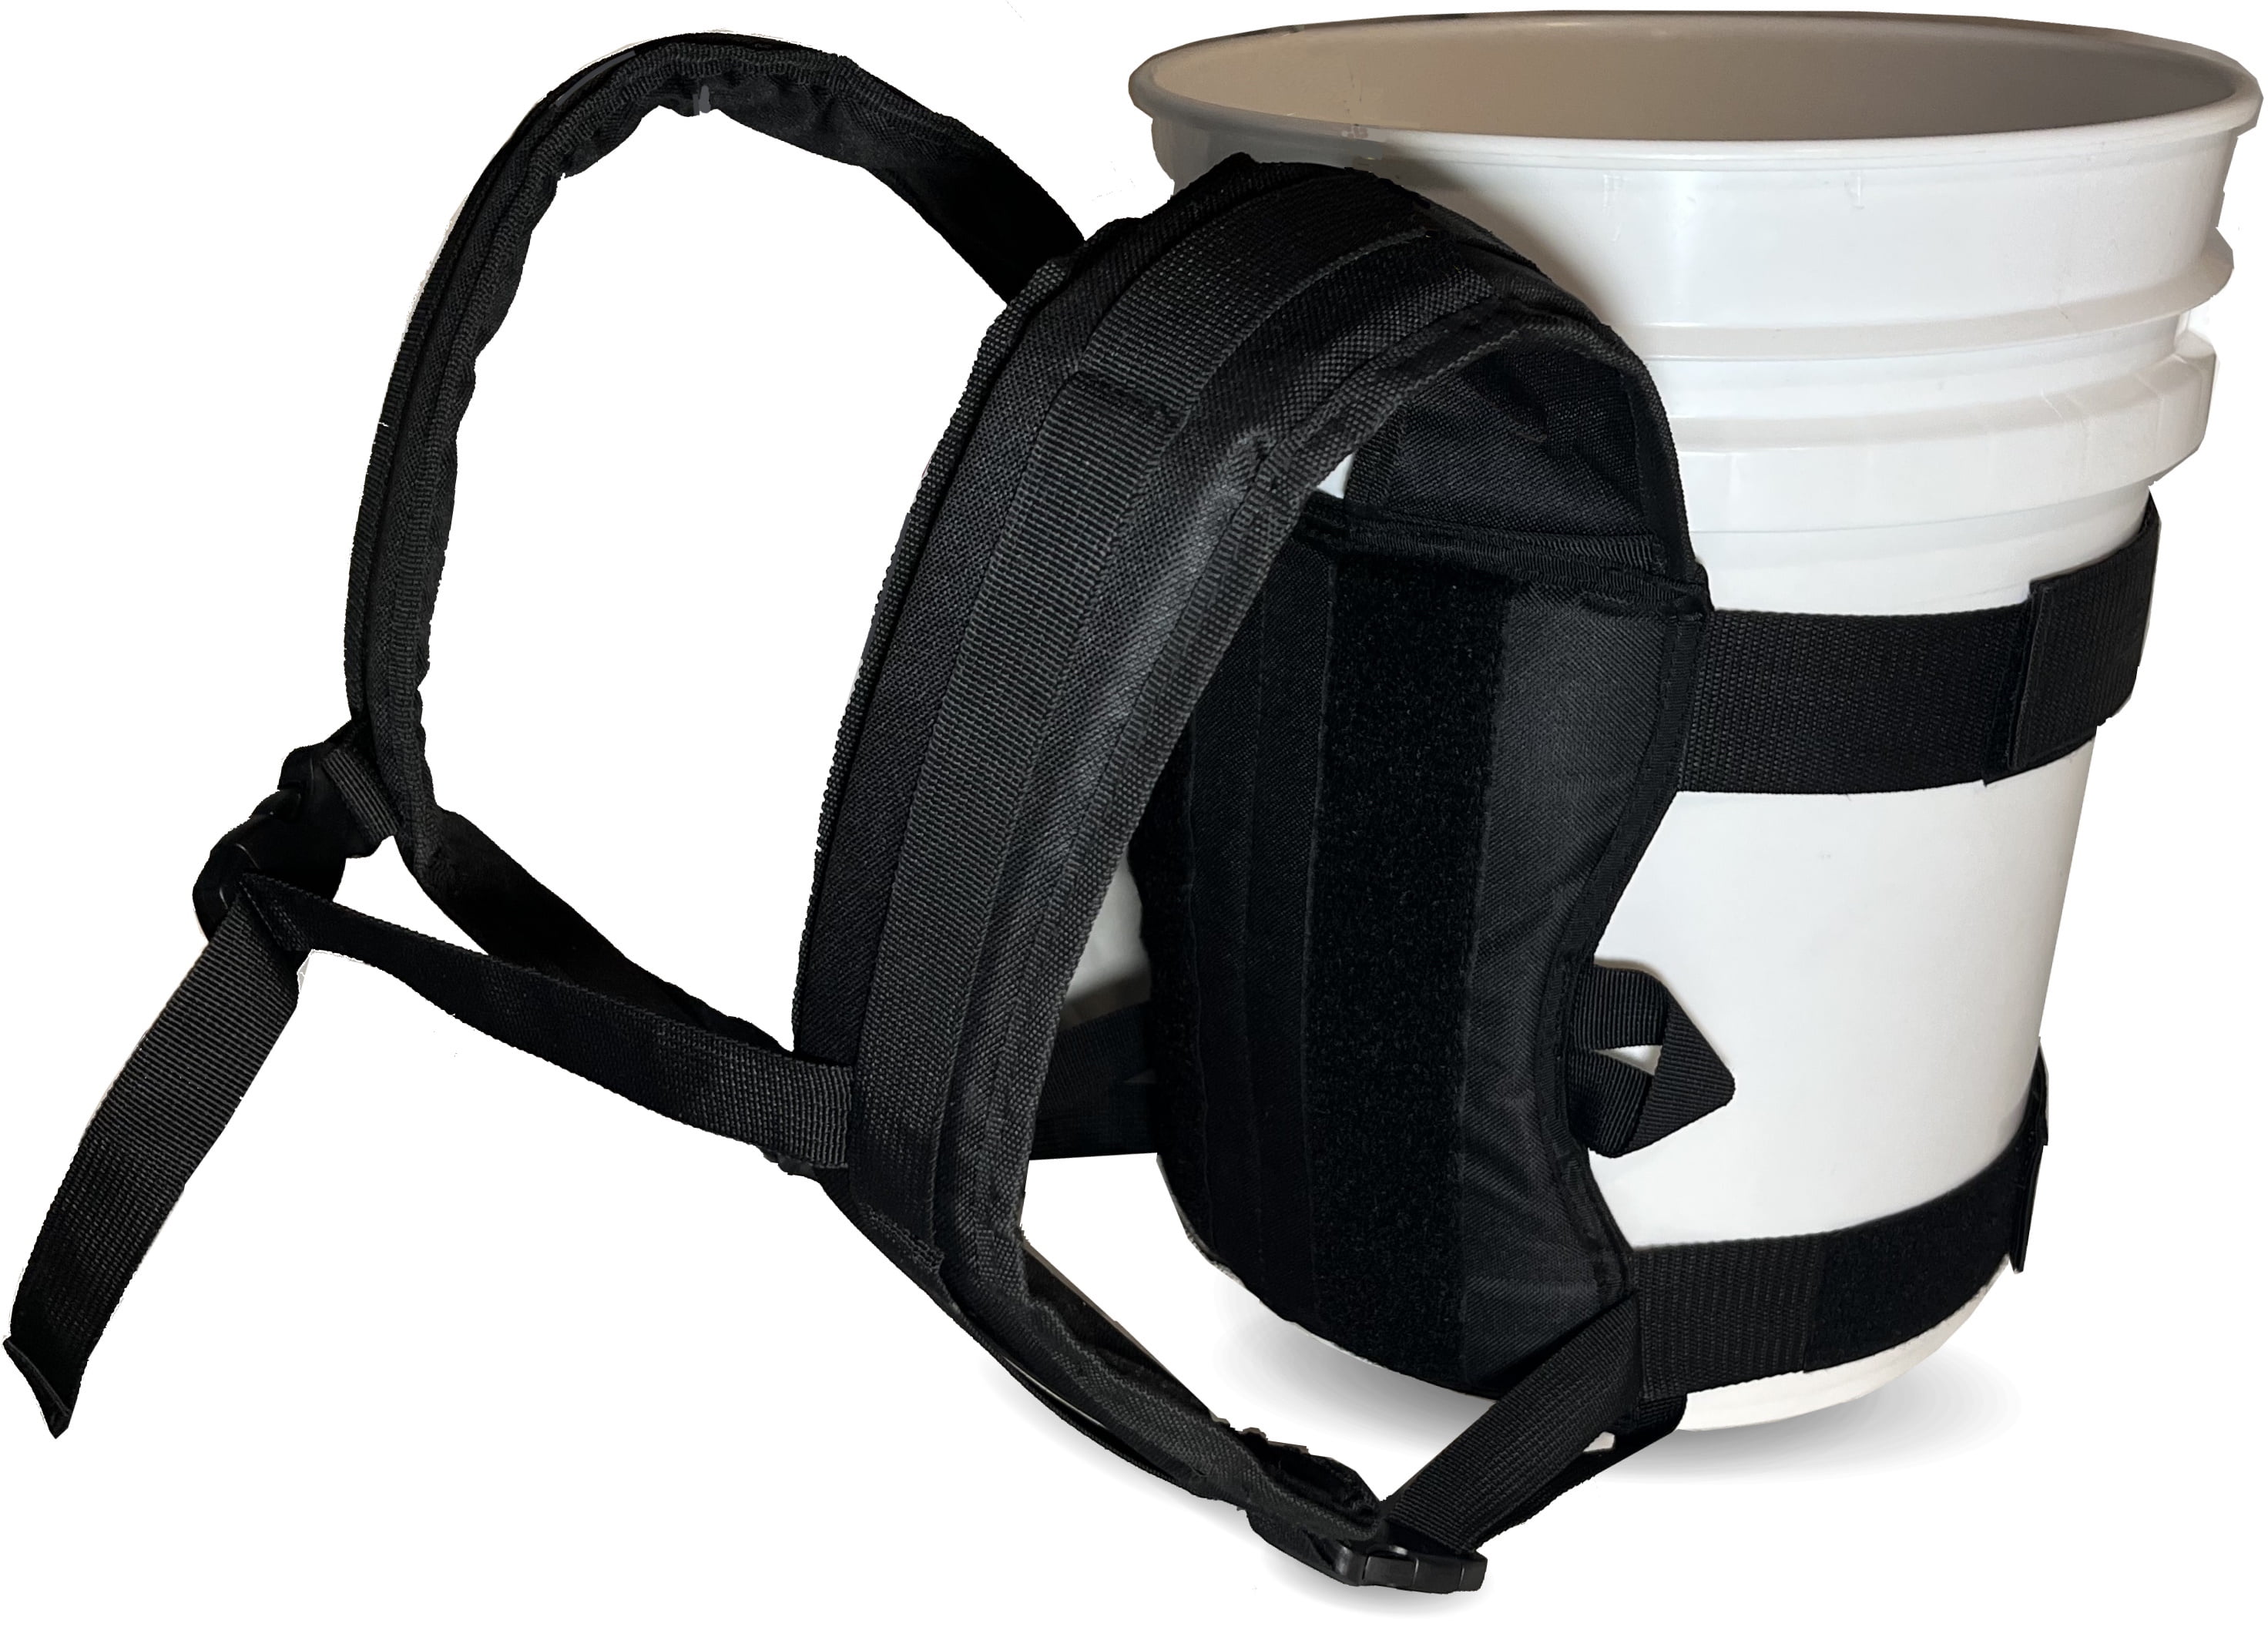 Backpack for 5 Gallon Buckets for Ice Fishing, Picking Apples and